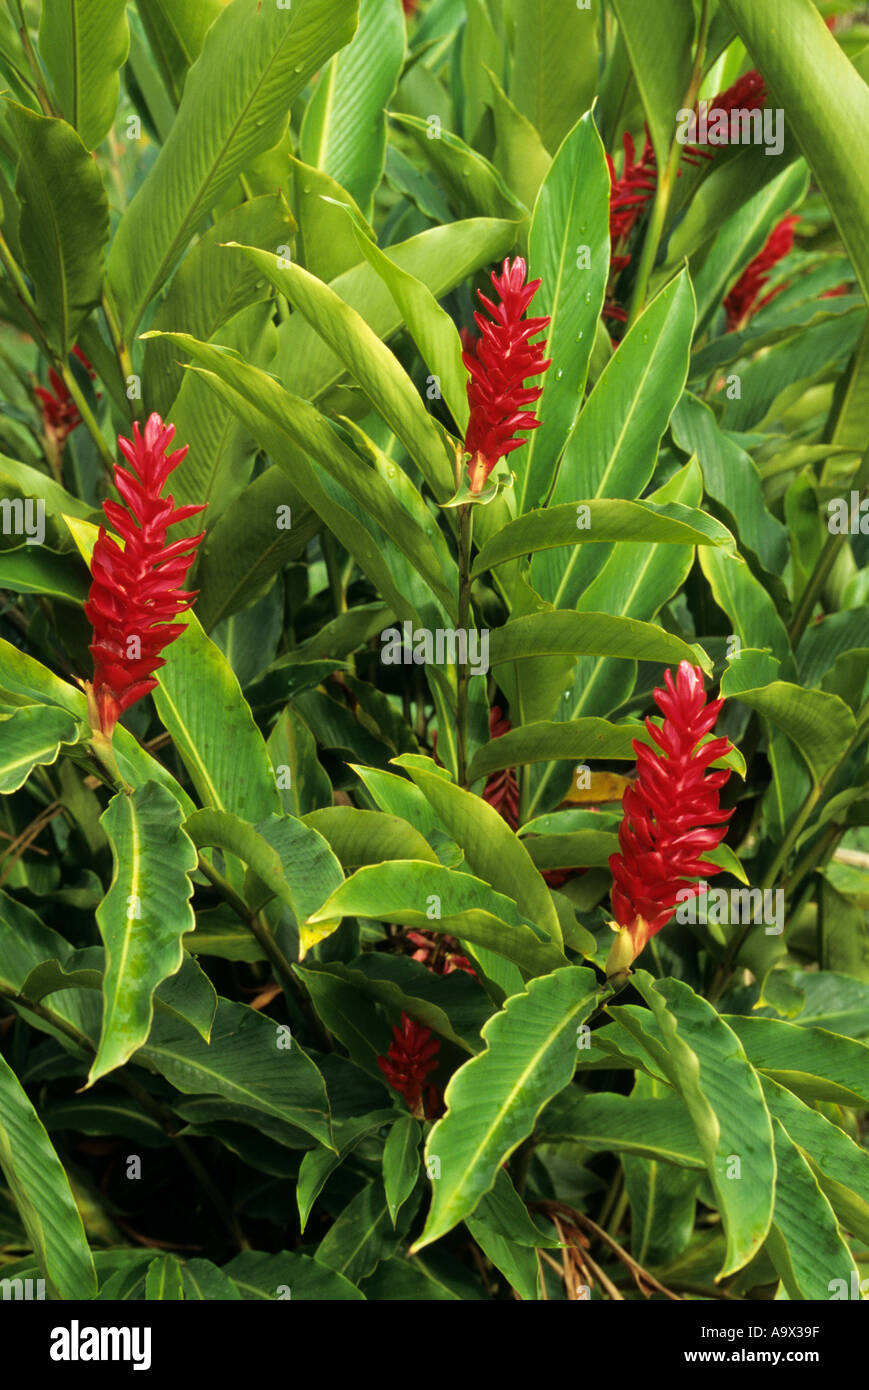 Amazon, Brazil. Flowering plant with bright red petals from the ginger family. Stock Photo